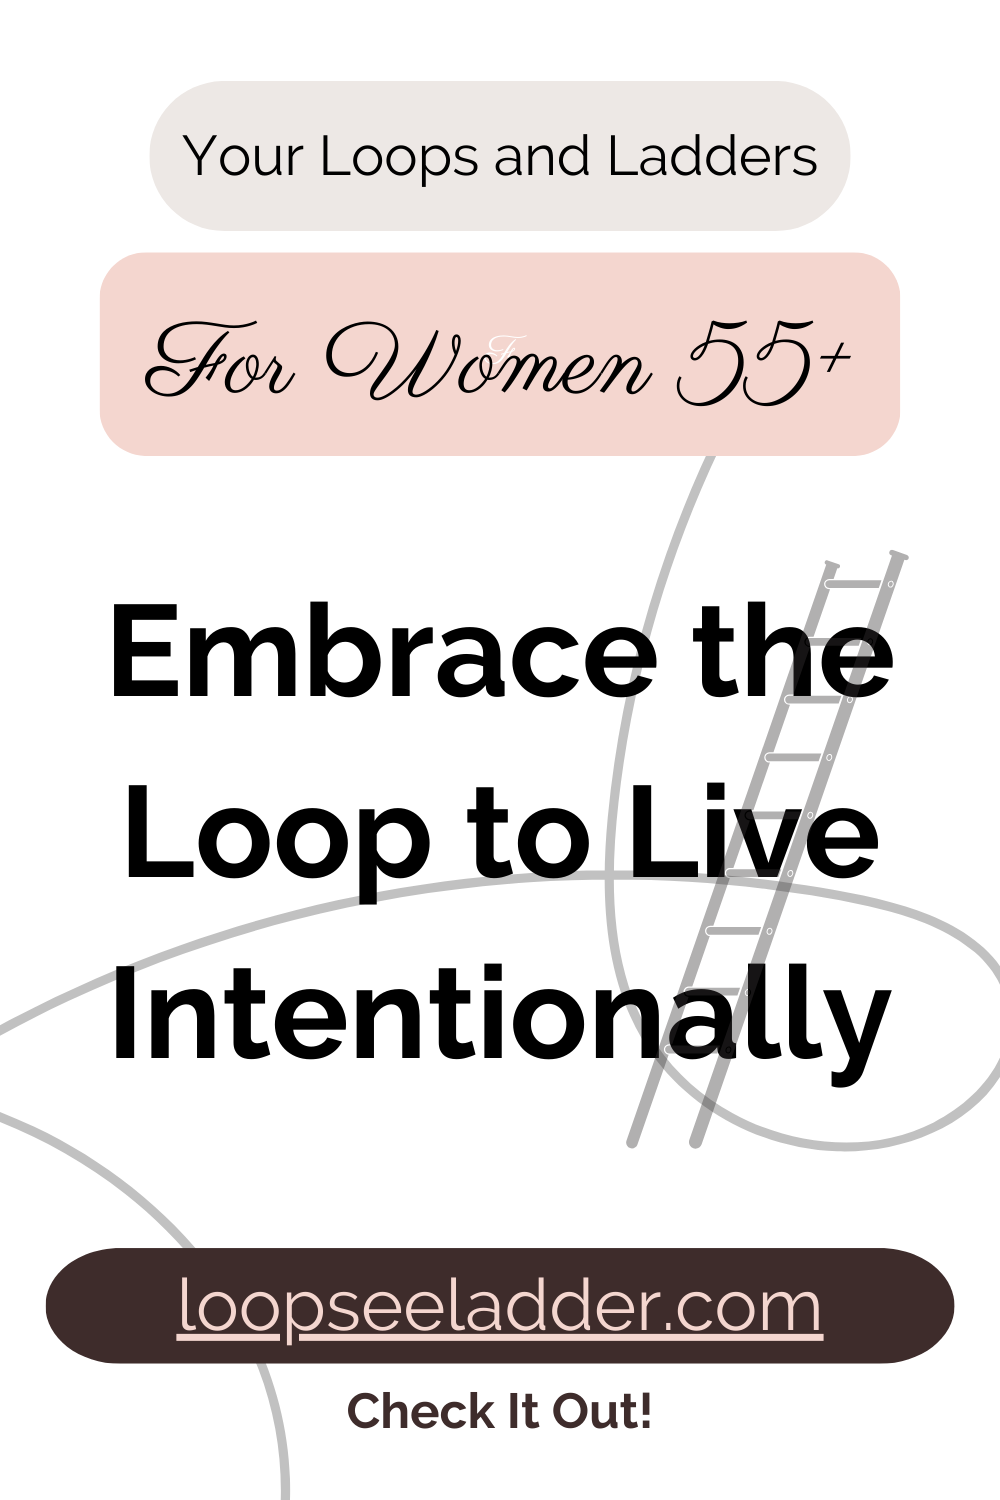 Why Women 55+ Should Embrace the Loop: Living with Intentionality